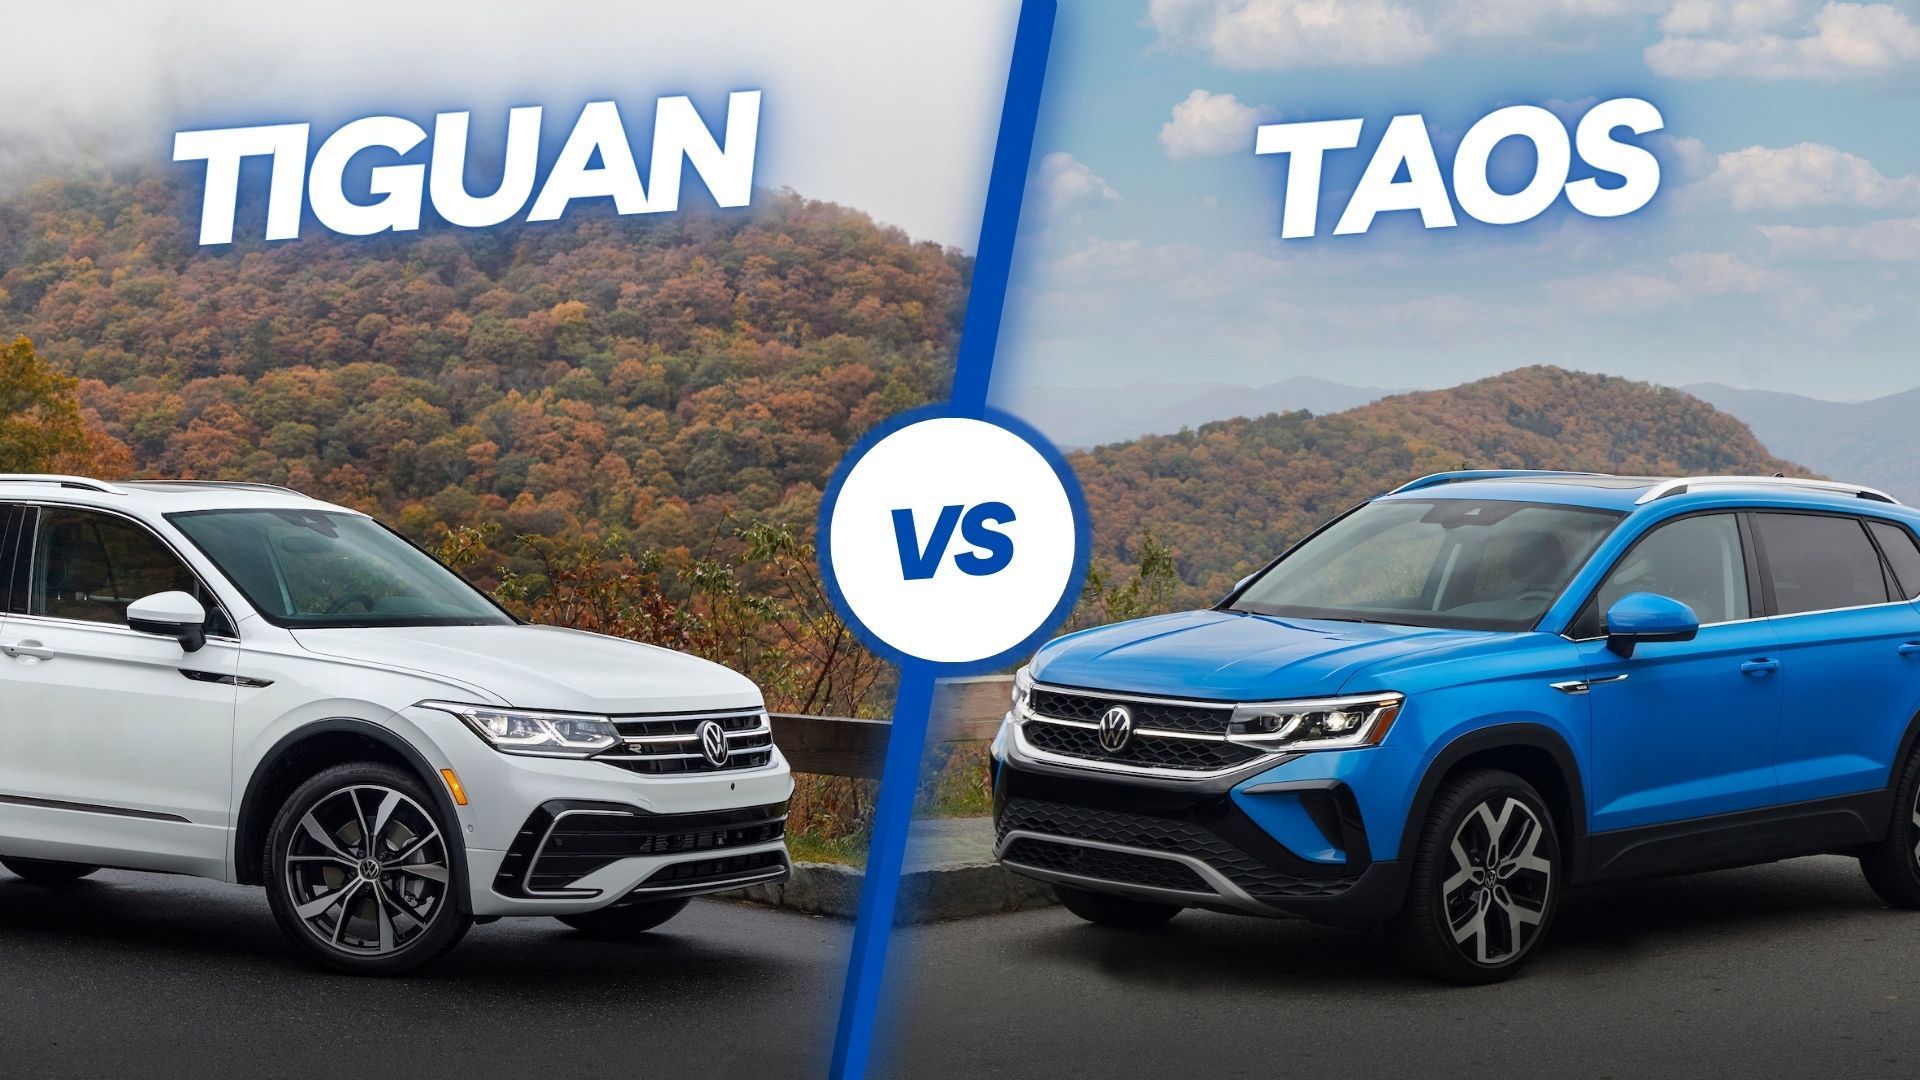 VW Taos vs Tiguan: What's the Difference?